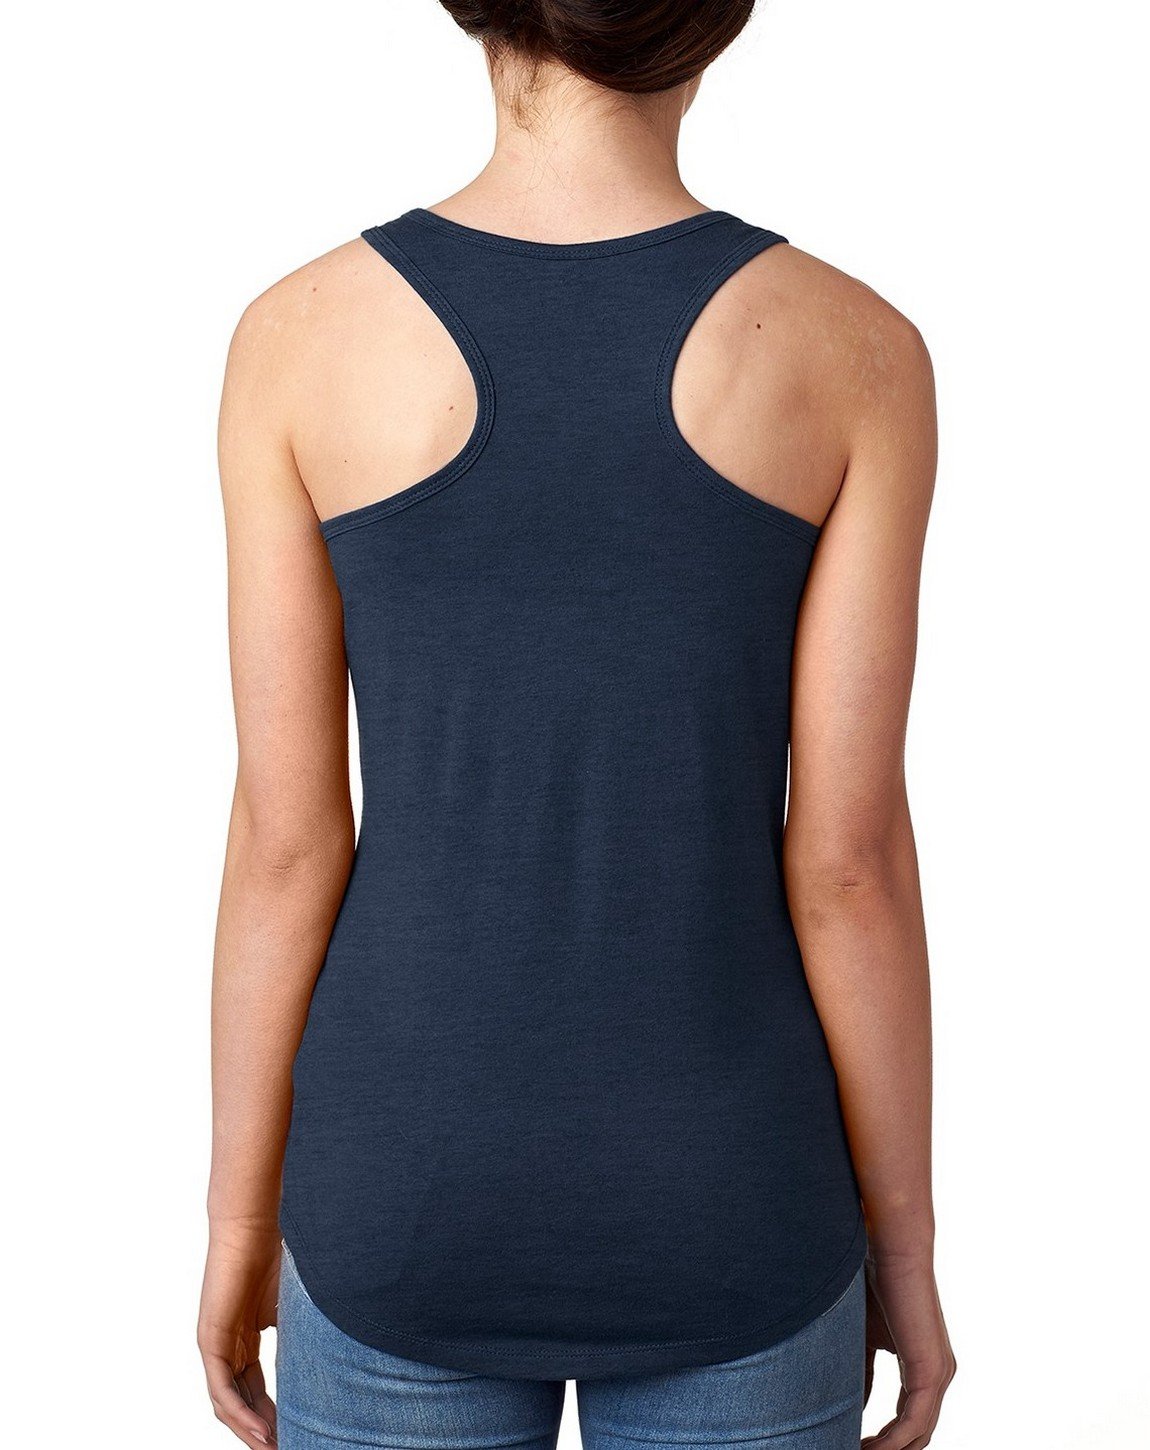 Next Level Ideal Racerback Tank Midnight Navy Large (Pack of 5)